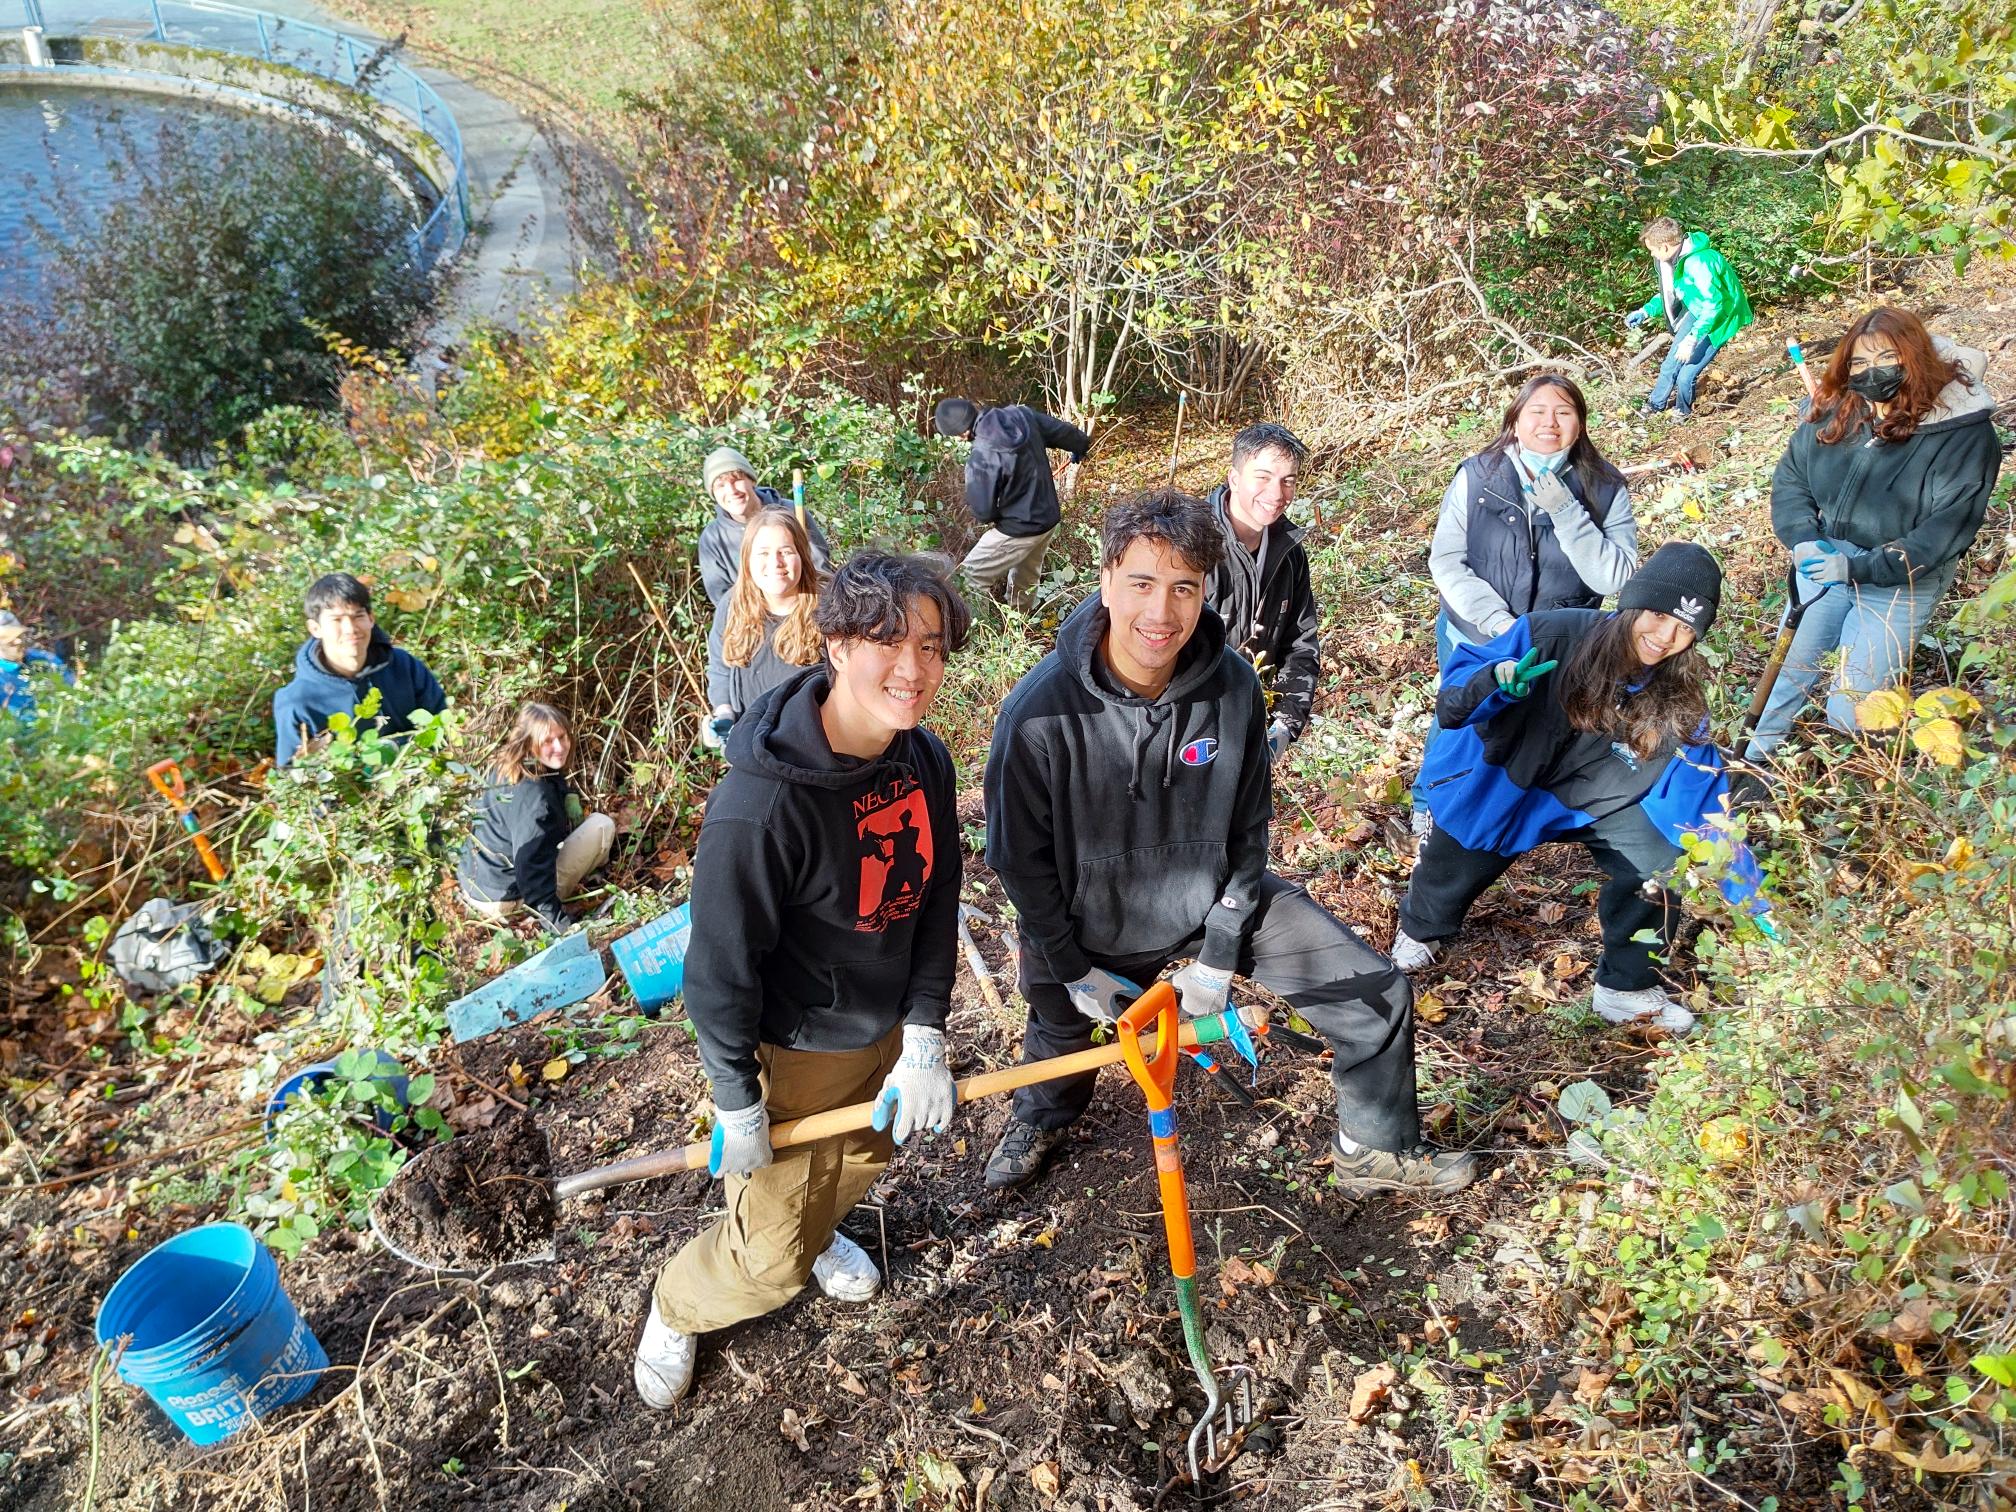 12 volunteers standing on a hillside pausing to smile while they remove invasive plants with various tools.